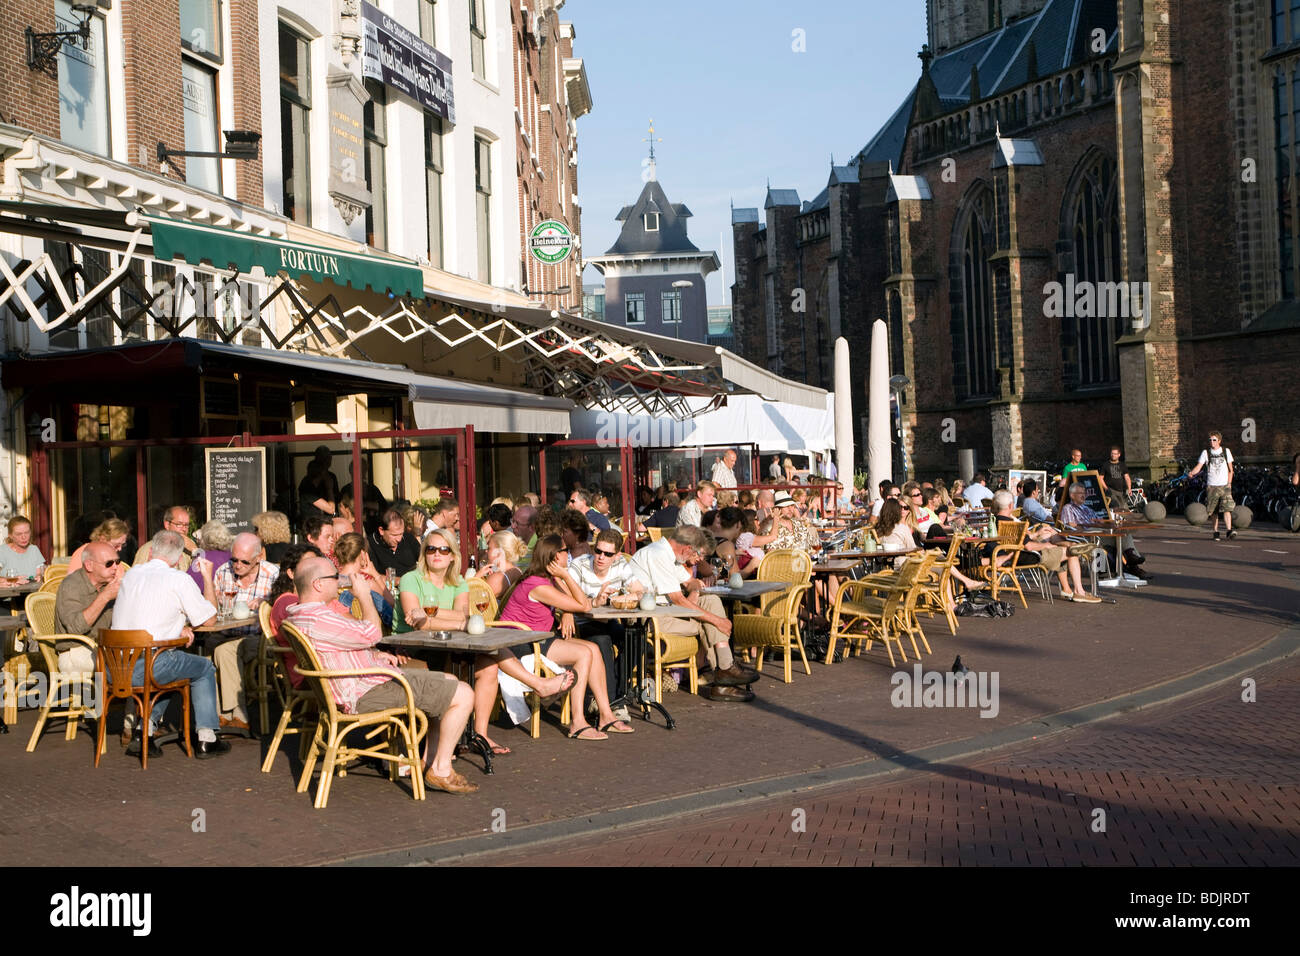 People outside at cafe tables and chairs, Grote Mart, Haarlem, Holland Stock Photo